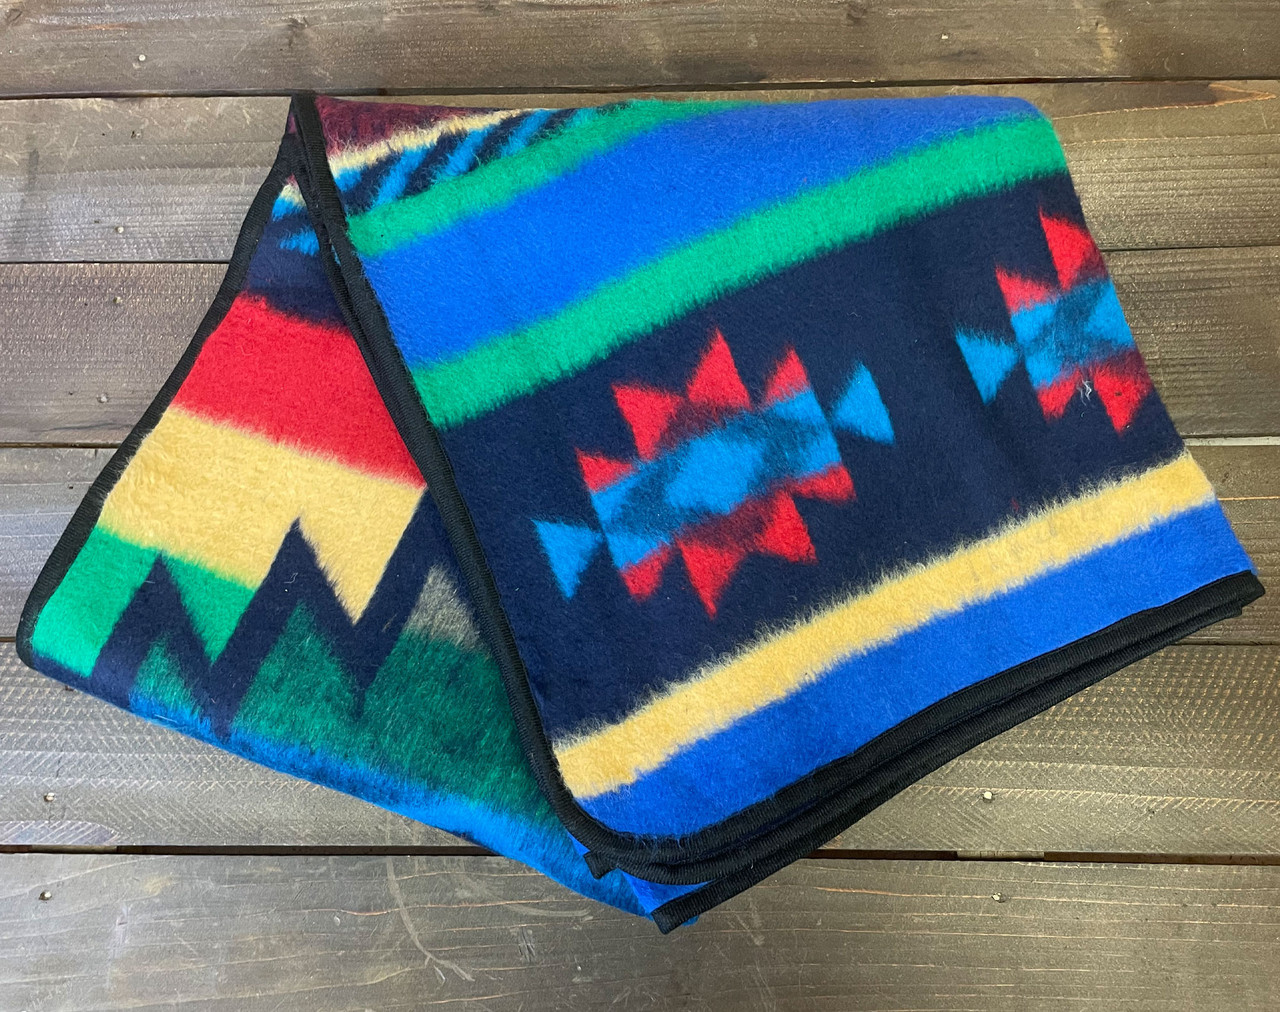 Rustic Bunkhouse Style Blanket 6x7 (169bc11) - Mission Del Rey Southwest